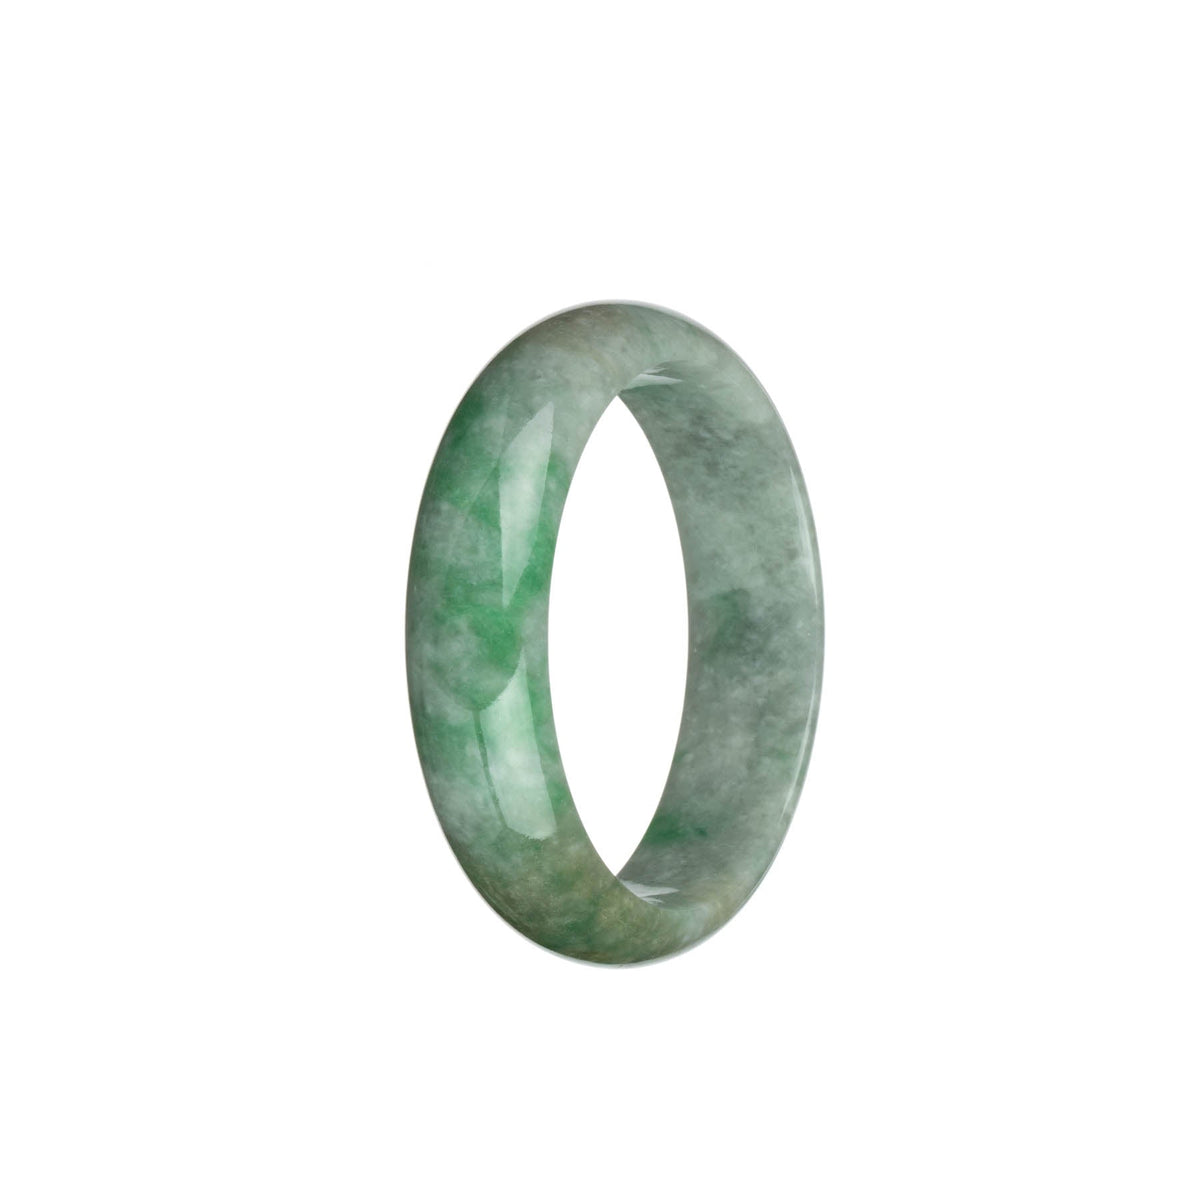 A close-up photo of a beautiful jade bracelet with a half moon shape. The bracelet is made of light grey jade with intricate emerald green patterns and light brown patches. It is a genuine Type A jadeite jade bracelet, measuring 51mm in size. The bracelet is from the brand MAYS™.